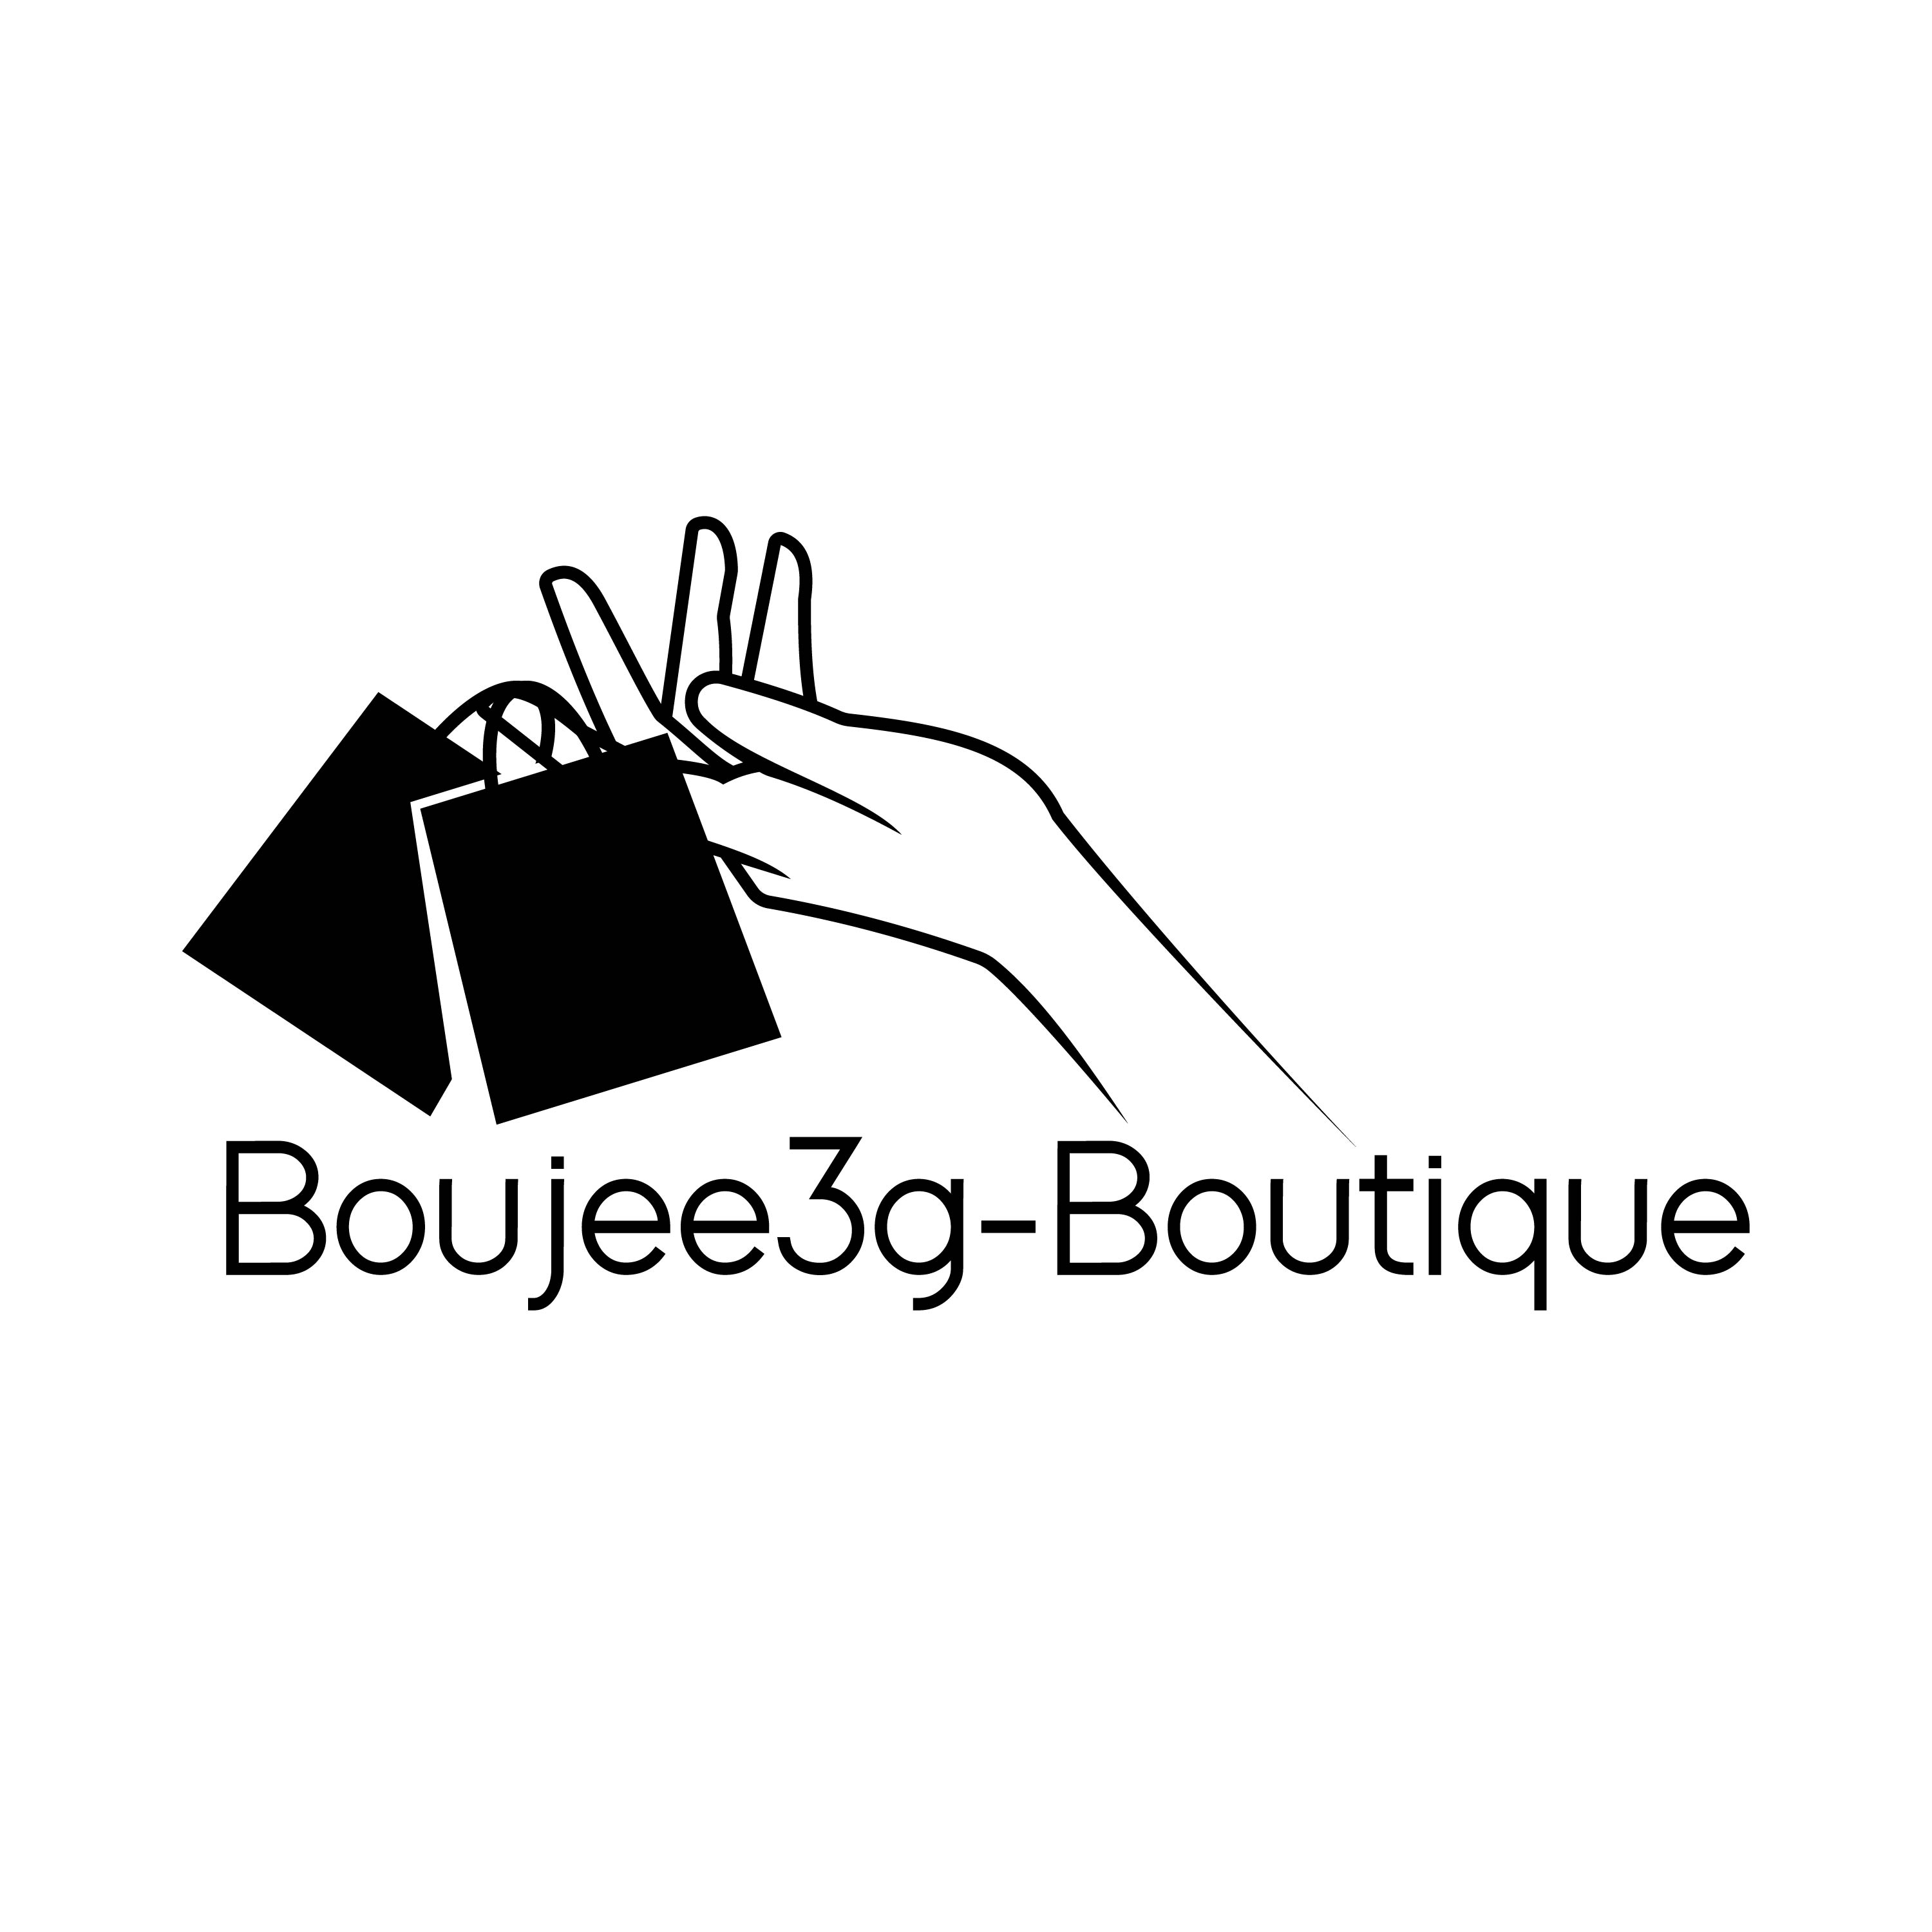 Boujee3g-Boutique - Saturday Shoppes